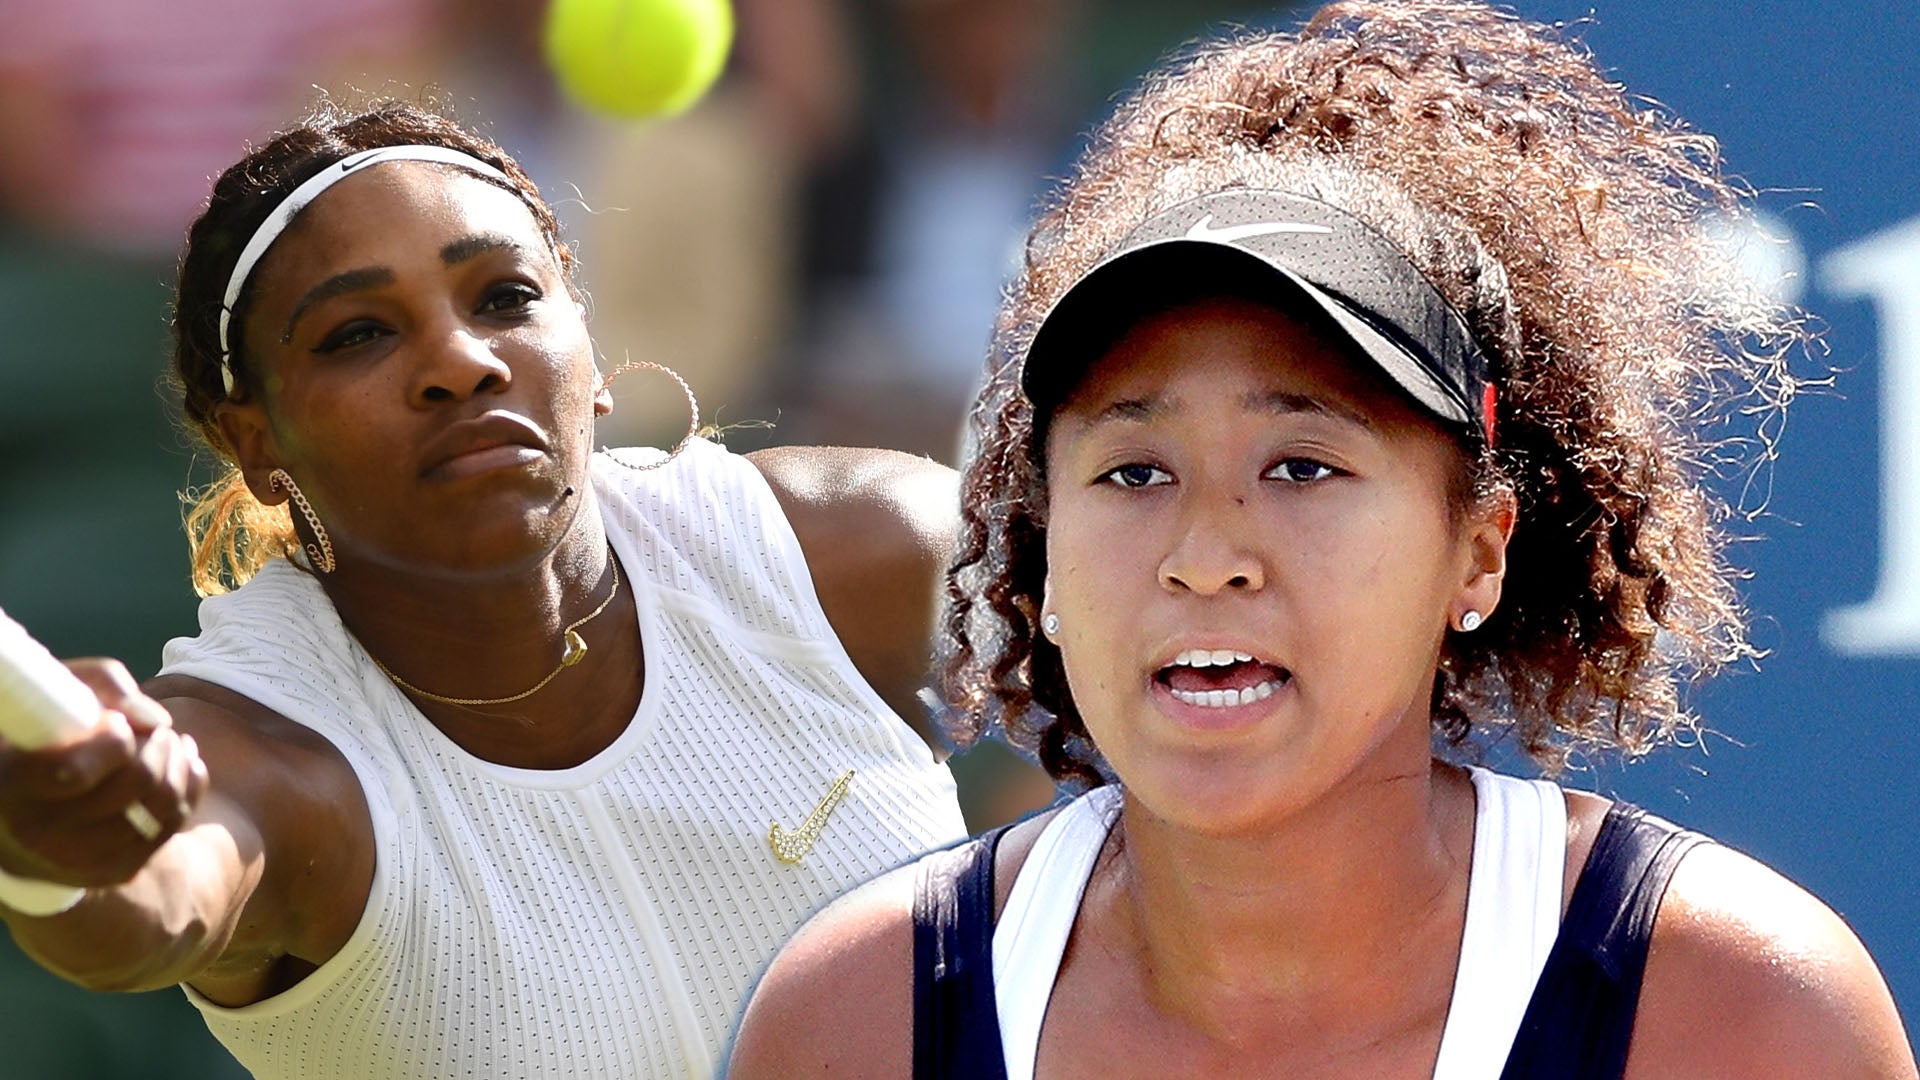 Watch Naomi Osaka Shares Her First Time Meeting Serena Williams